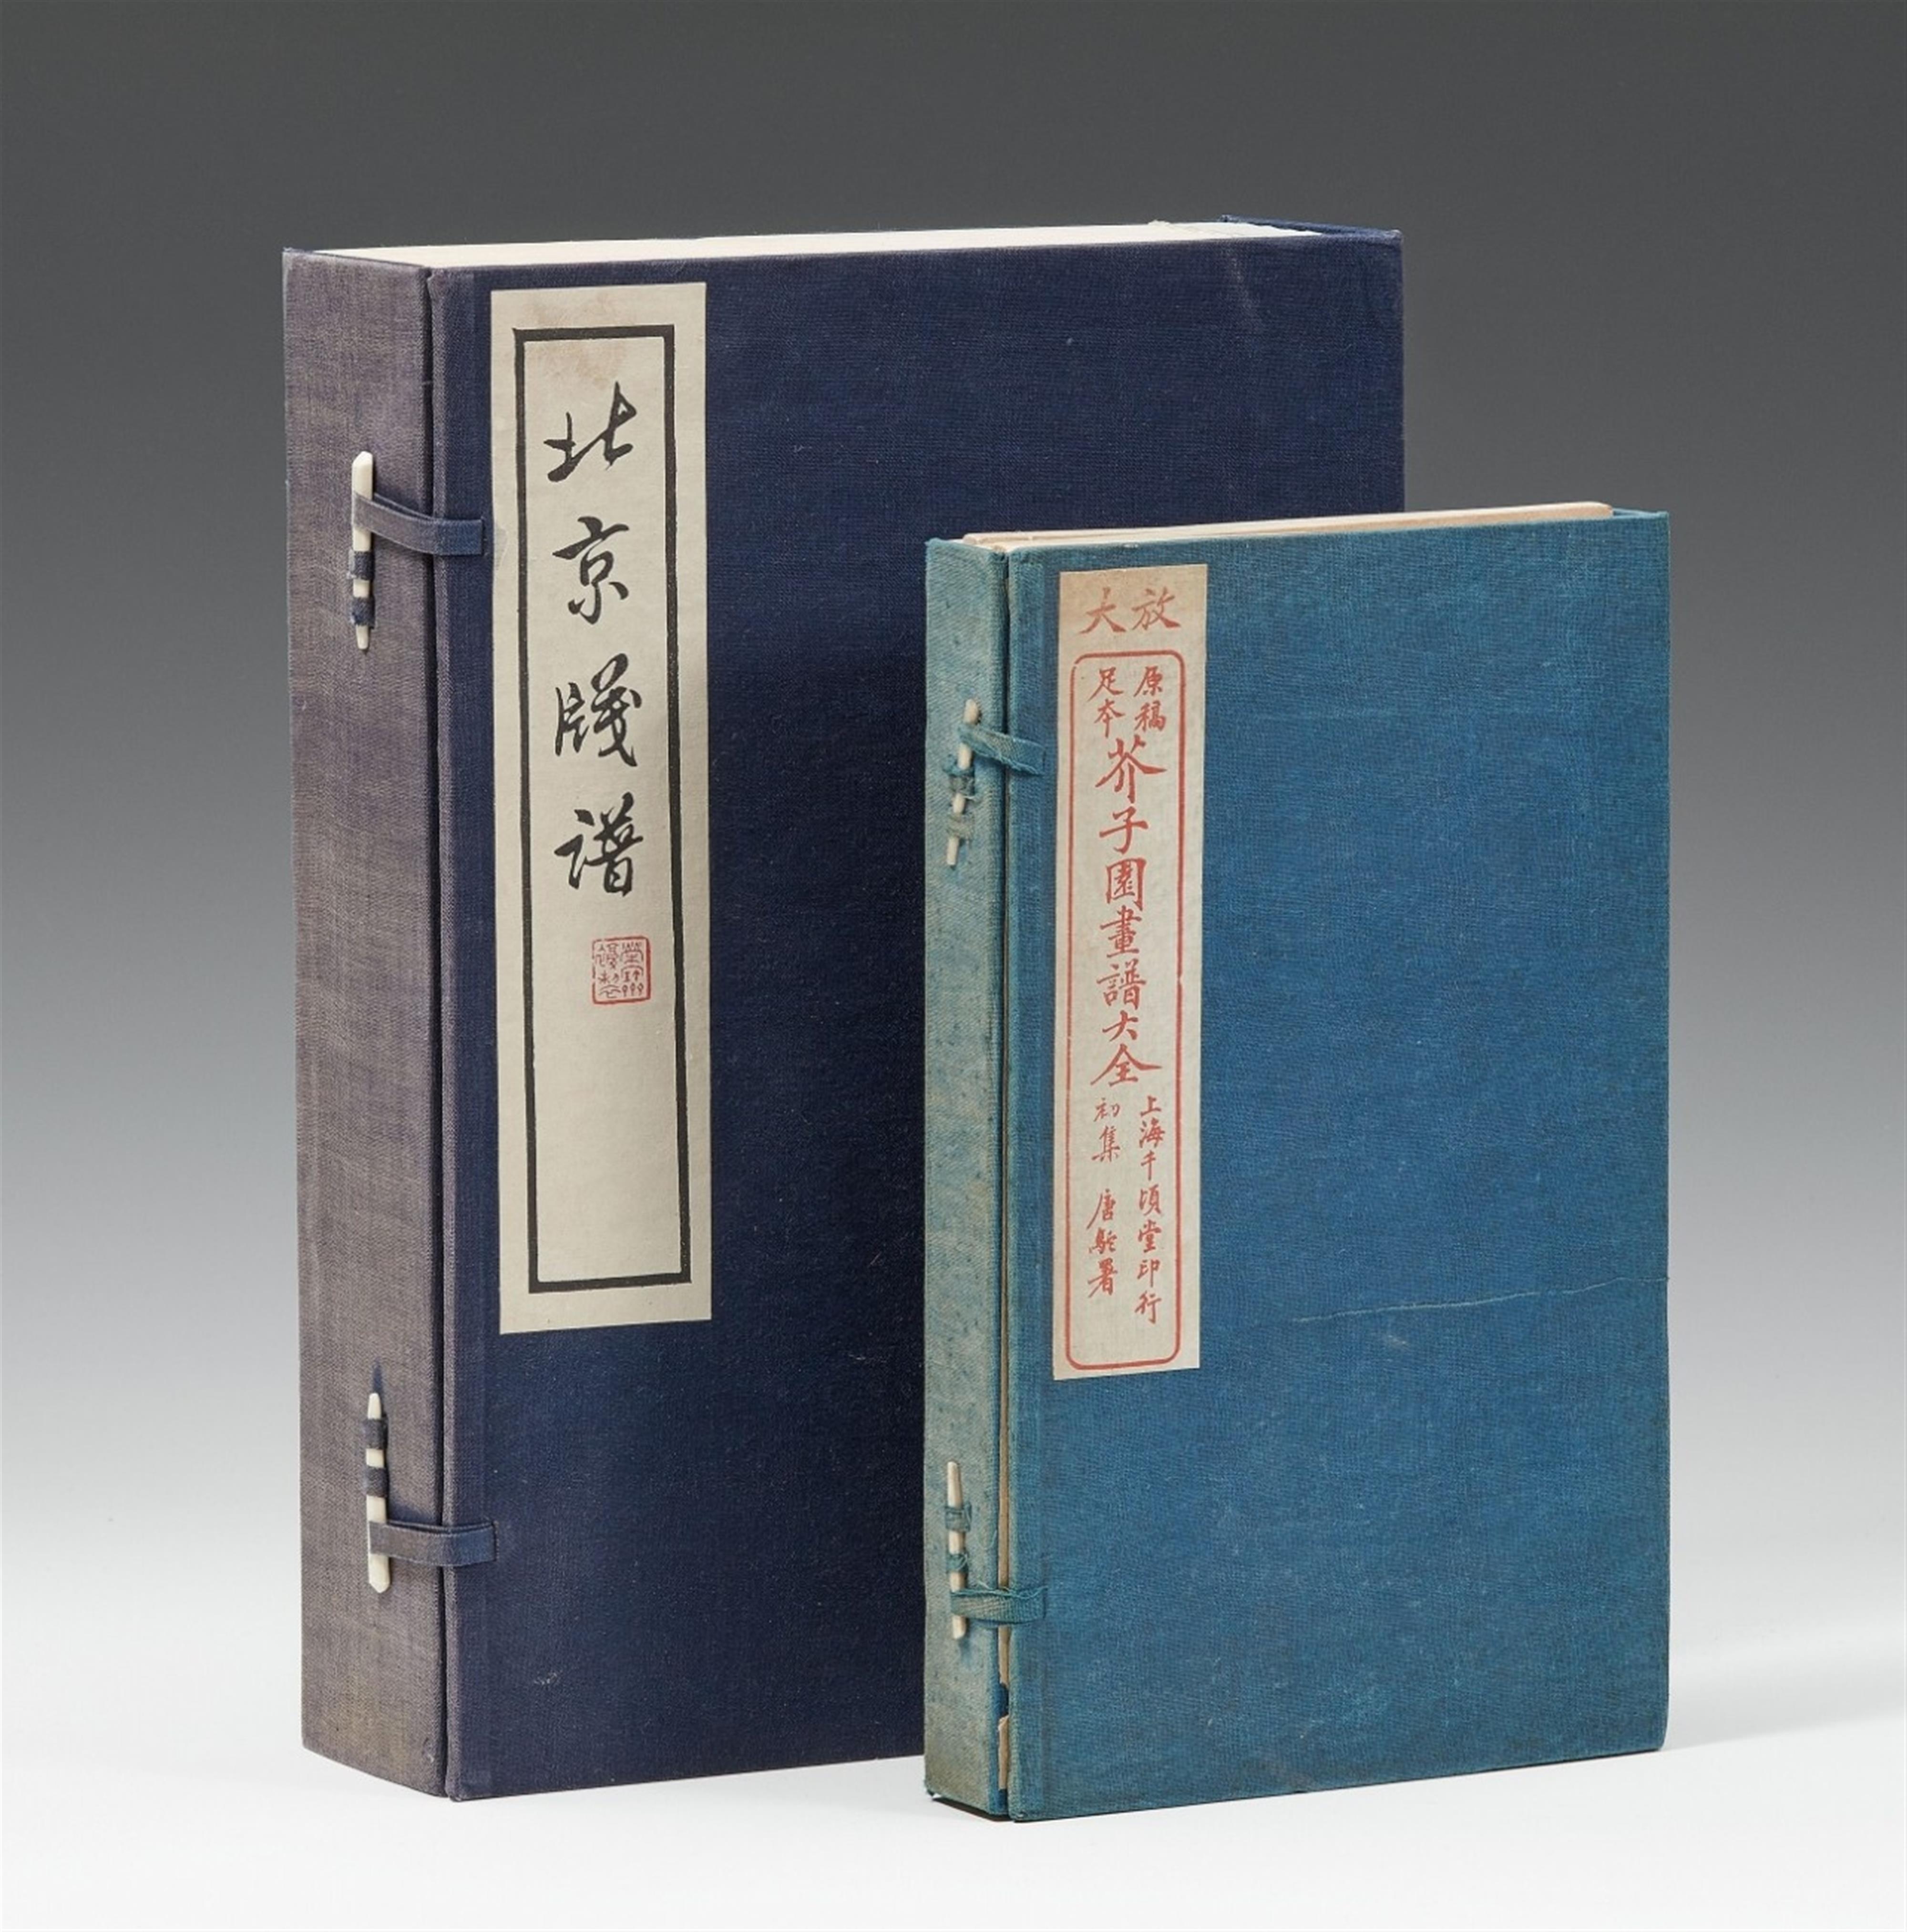 Various artists - Four woodblock-printed volumes of "Jiezi yuan huazhuan daquan" (The Mustard Seed Garden painting manual). Shanghai. Stitched, cloth case. - image-1